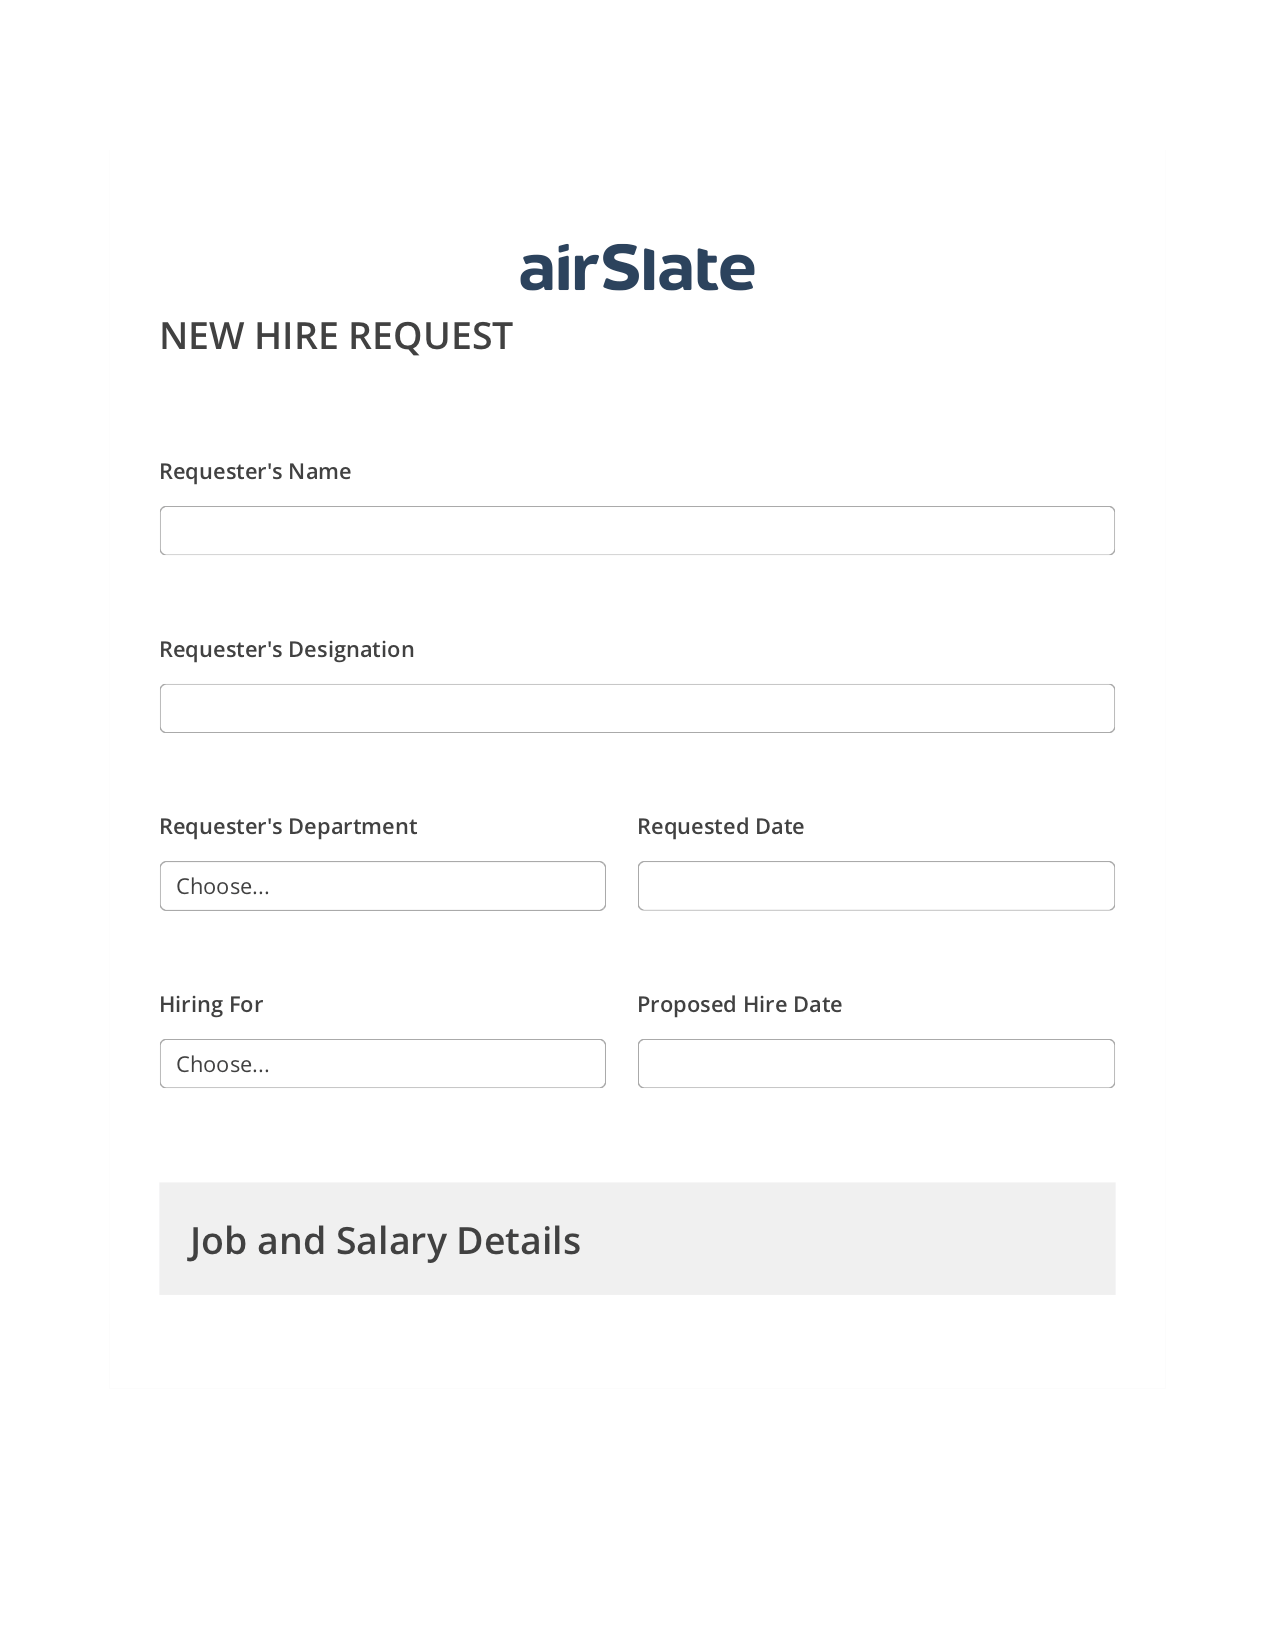 Multirole Hiring Request Workflow Pre-fill Dropdowns from CSV file Bot, Send Mailchimp Campaign Bot, Archive to Google Drive Bot